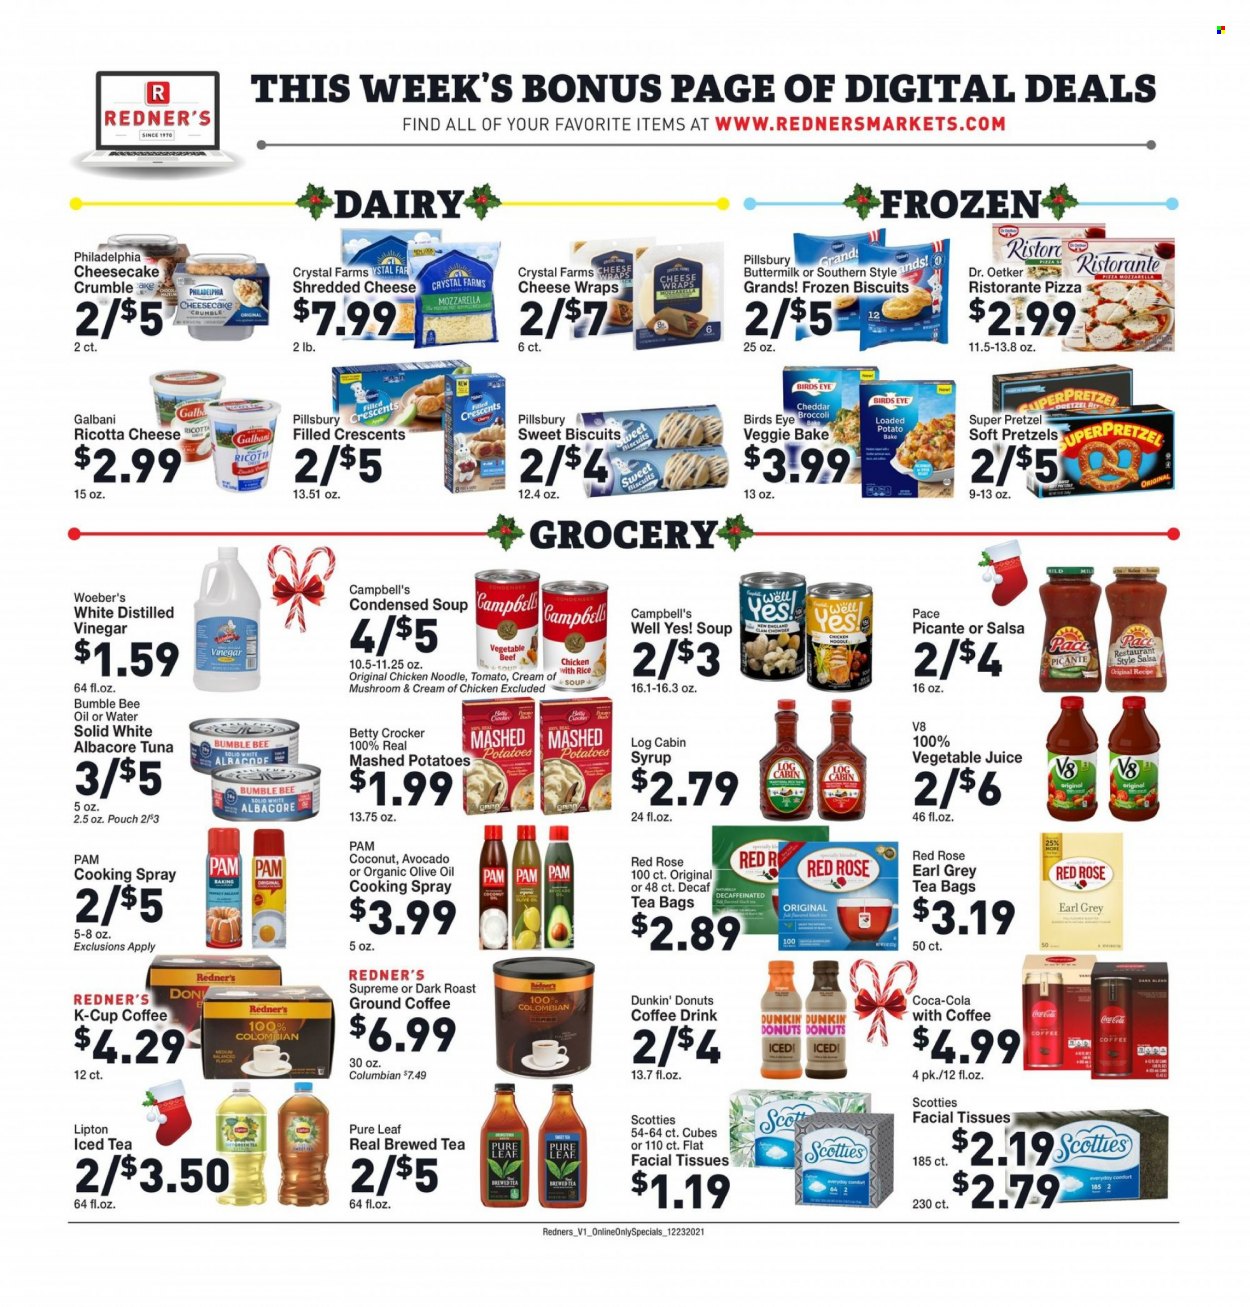 thumbnail - Redner's Markets Flyer - 12/23/2021 - 12/29/2021 - Sales products - pretzels, wraps, donut, Dunkin' Donuts, broccoli, avocado, coconut, tuna, Campbell's, mashed potatoes, pizza, condensed soup, soup, Bumble Bee, Pillsbury, Bird's Eye, noodles, instant soup, ricotta, shredded cheese, Philadelphia, cheddar, Dr. Oetker, Galbani, buttermilk, biscuit, salsa, cooking spray, vinegar, olive oil, syrup, Coca-Cola, juice, Lipton, vegetable juice, tea bags, Pure Leaf, coffee, ground coffee, coffee capsules, K-Cups, wine, rosé wine, tissues, facial tissues, rose. Page 7.